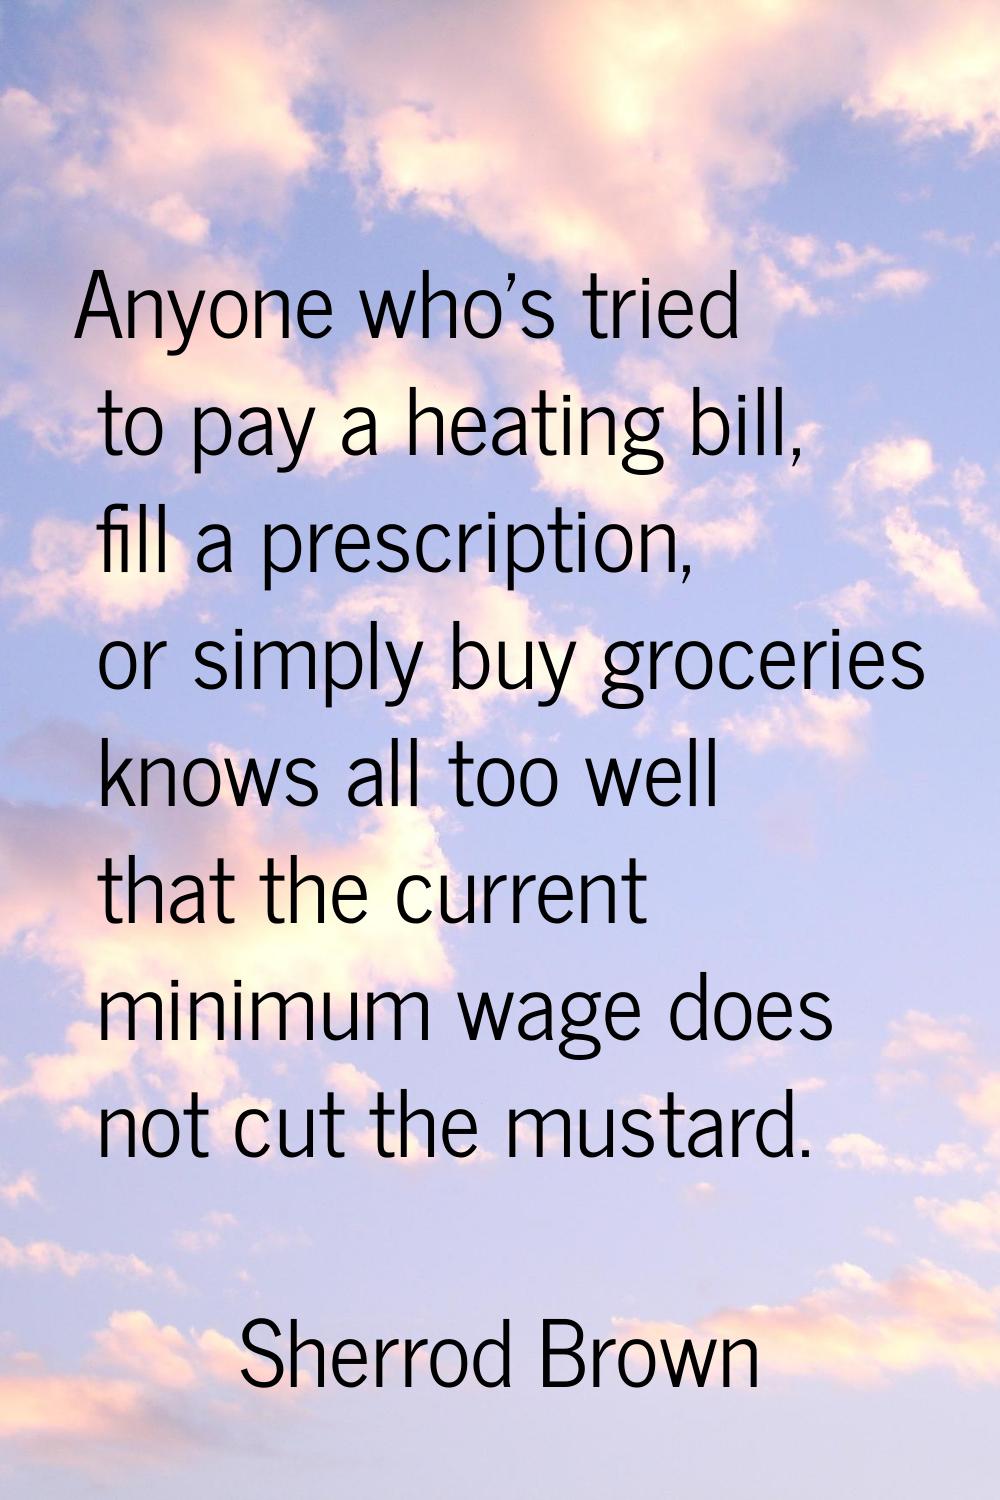 Anyone who's tried to pay a heating bill, fill a prescription, or simply buy groceries knows all to